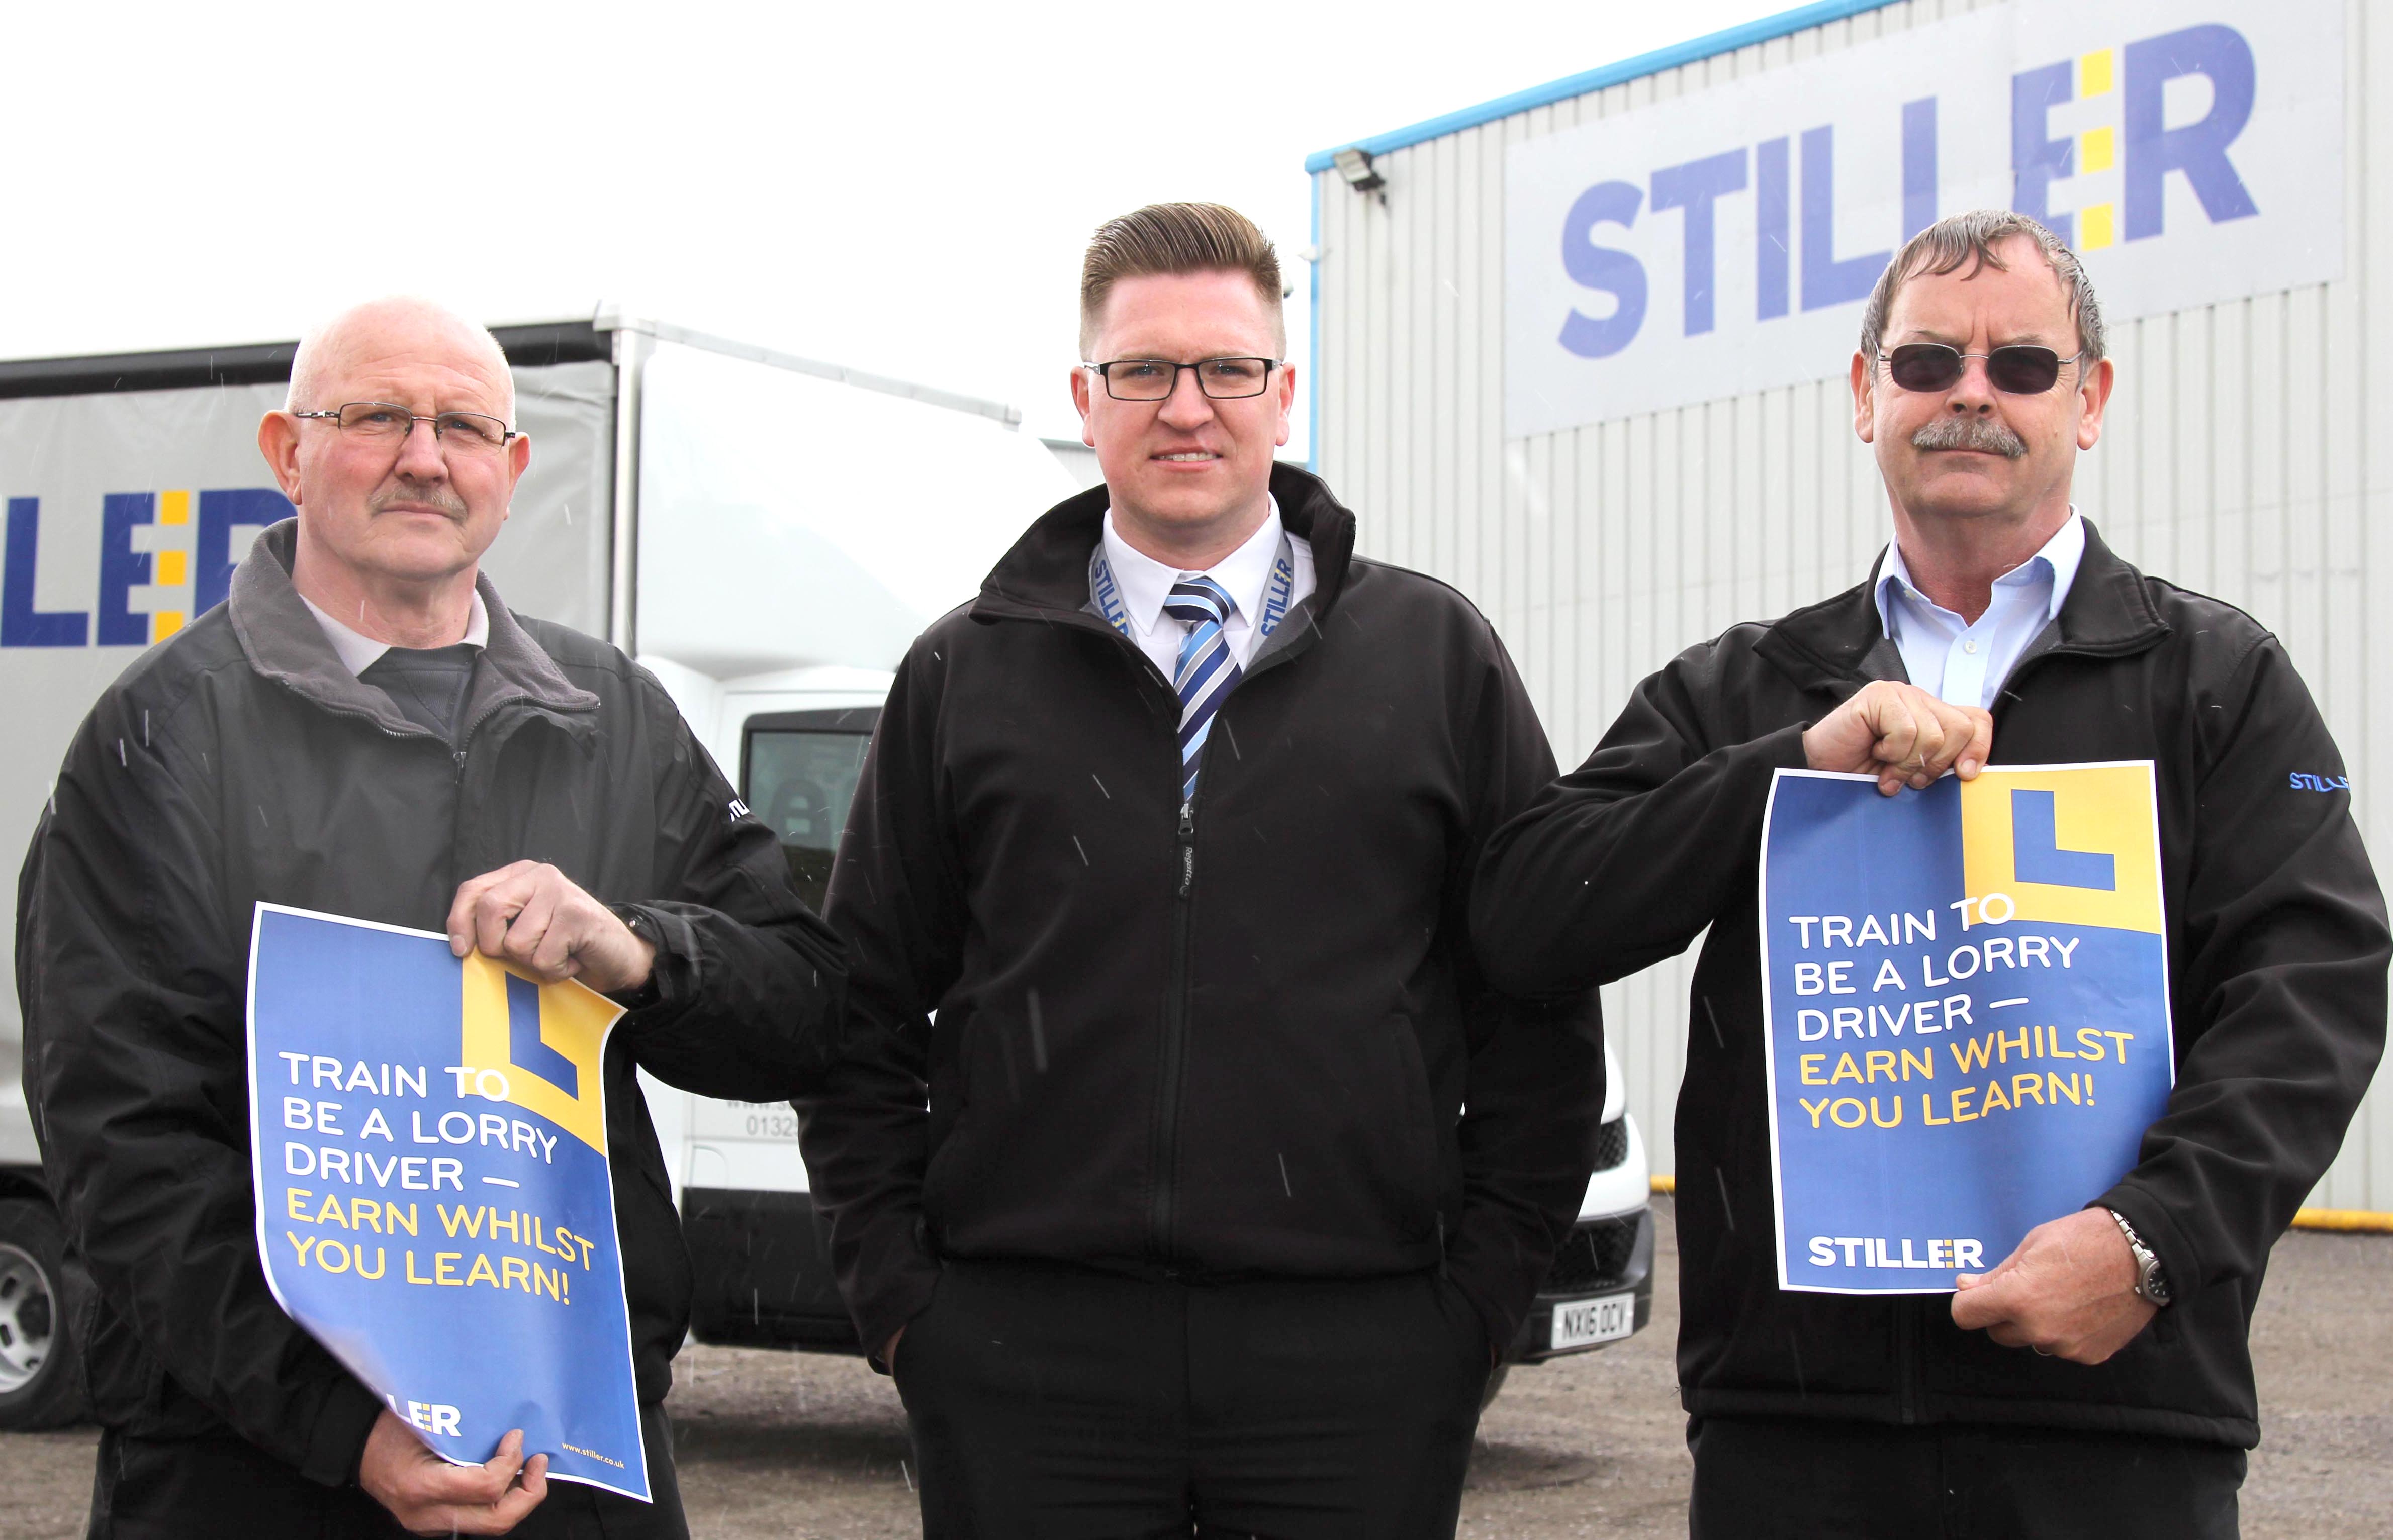 Earn While You Learn to Drive hgv’s at Stillers